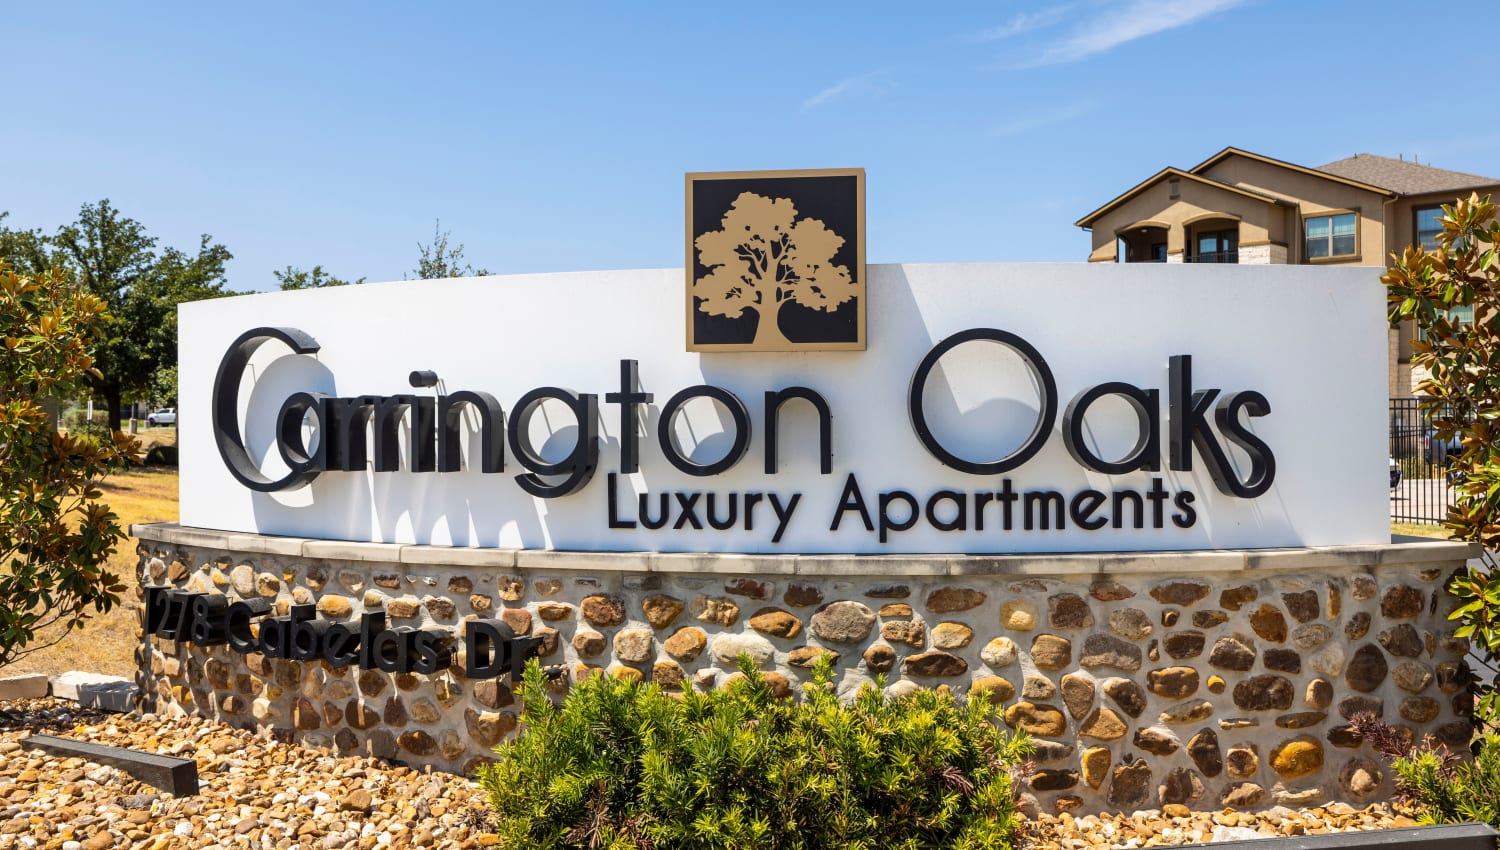 Our sign welcoming residents and their guests to Carrington Oaks in Buda, Texas